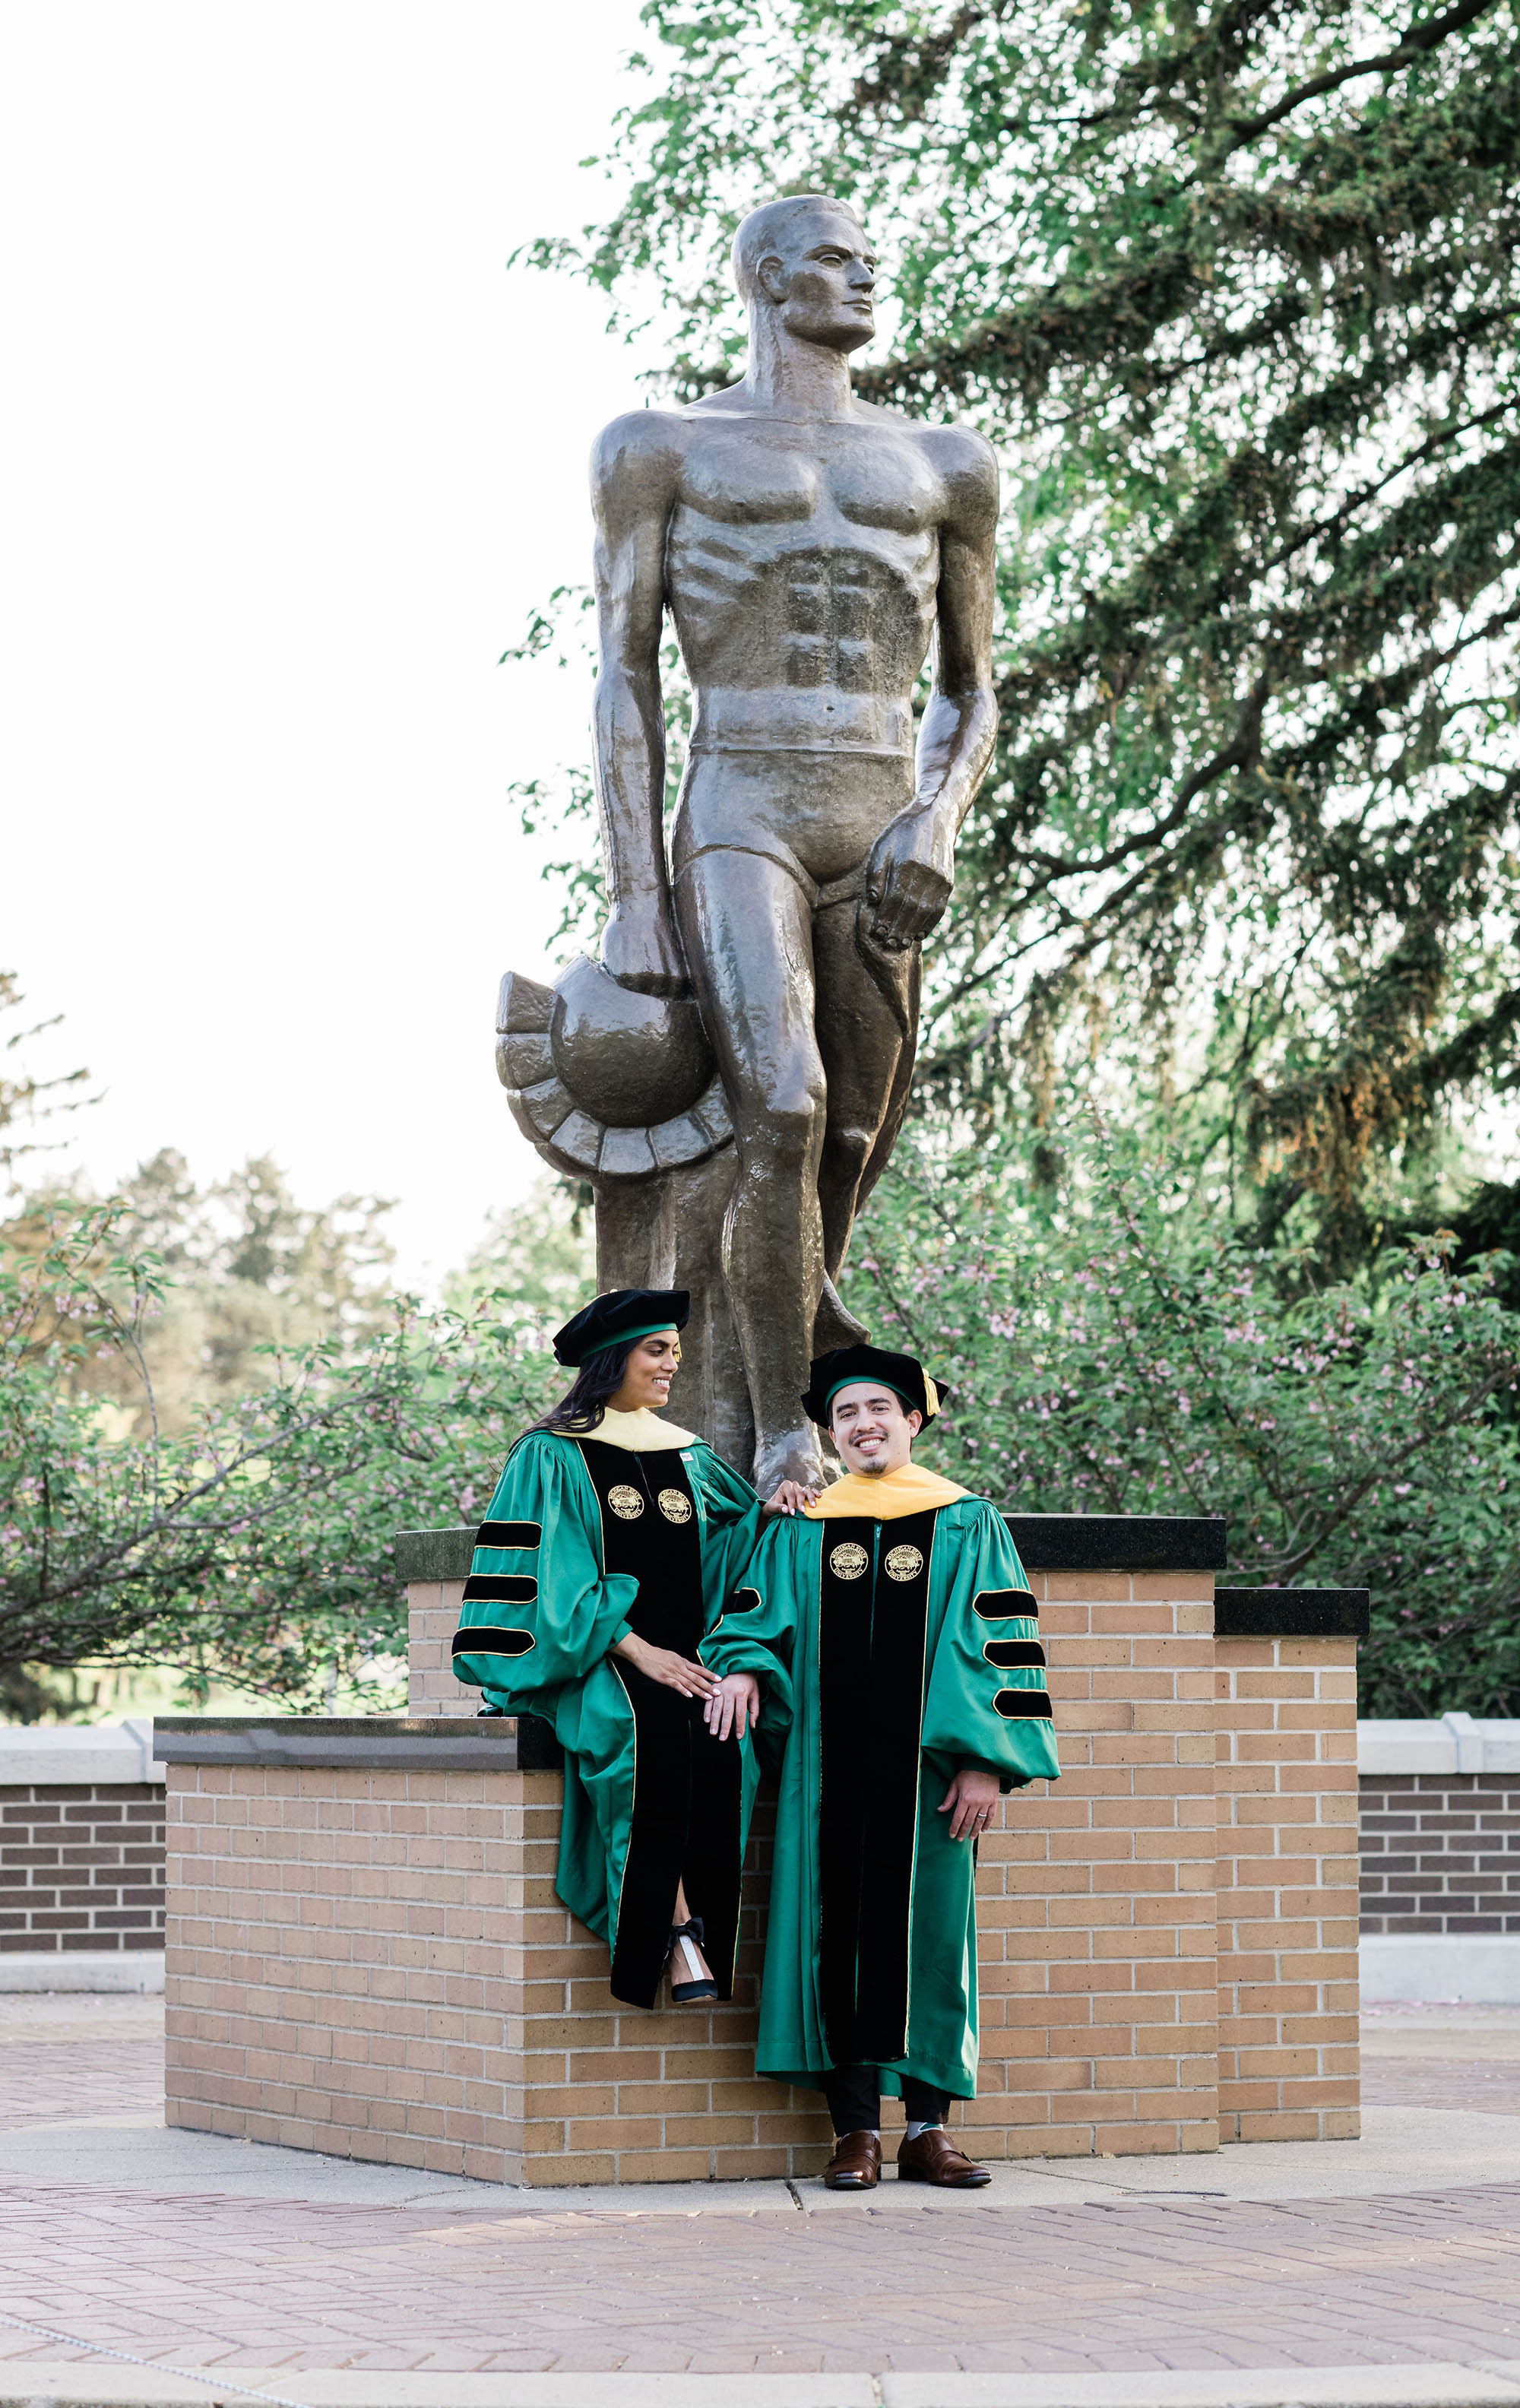 Chelsie Boodoo and husband in academic robes with Spartan statue